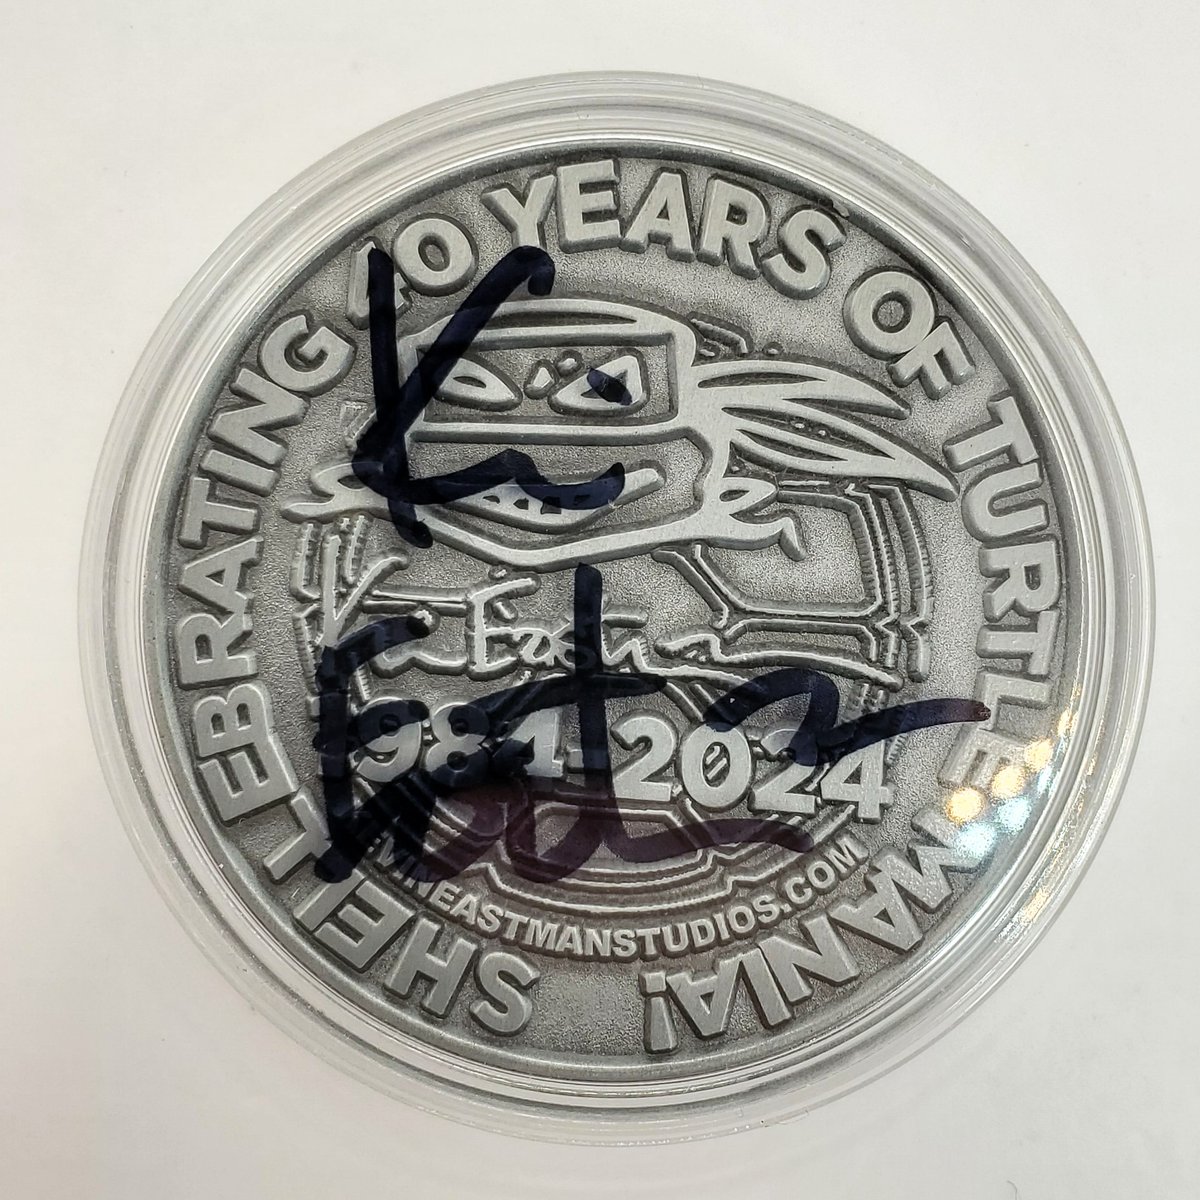 The TMNT 40th anniversary commemorative coin, signed by Kevin Eastman.

#TMNT #kevineastman